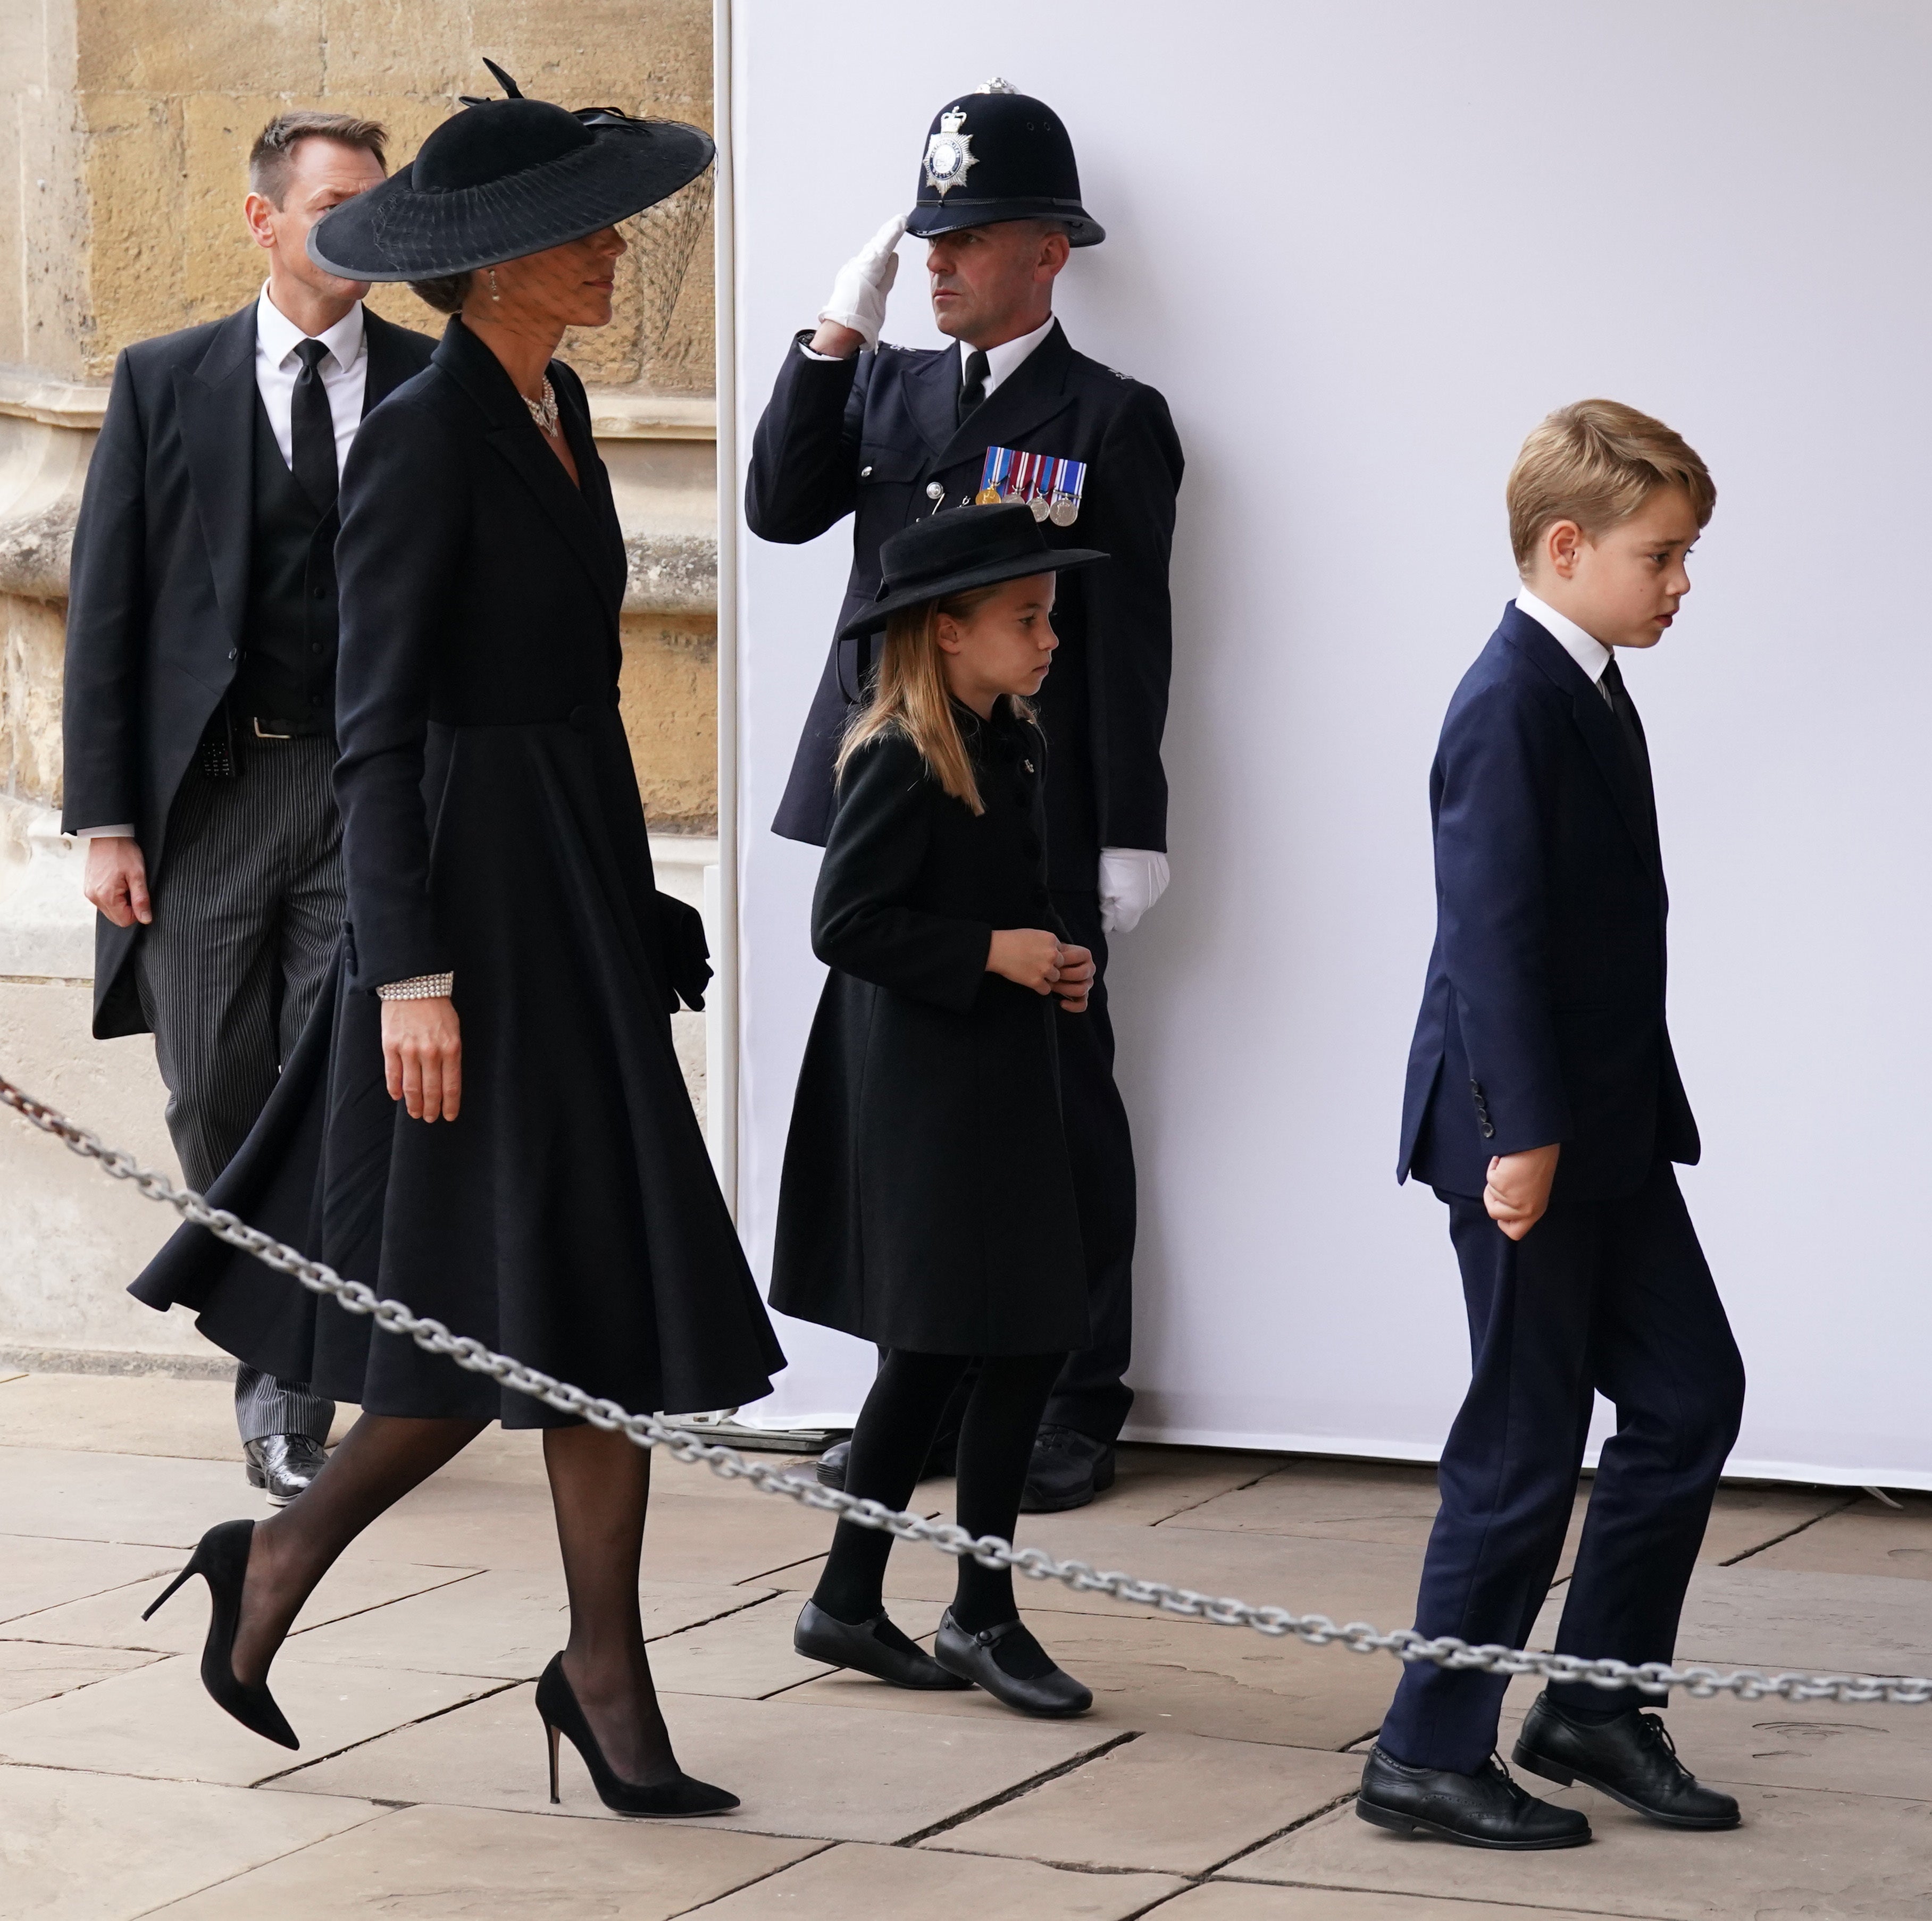 The Princess of Wales, Prince George and Princess Charlotte arrive at the Committal Service for Queen Elizabeth II held at St George’s Chapel in Windsor Castle, Berkshire. (Kirsty O’Connor/PA)